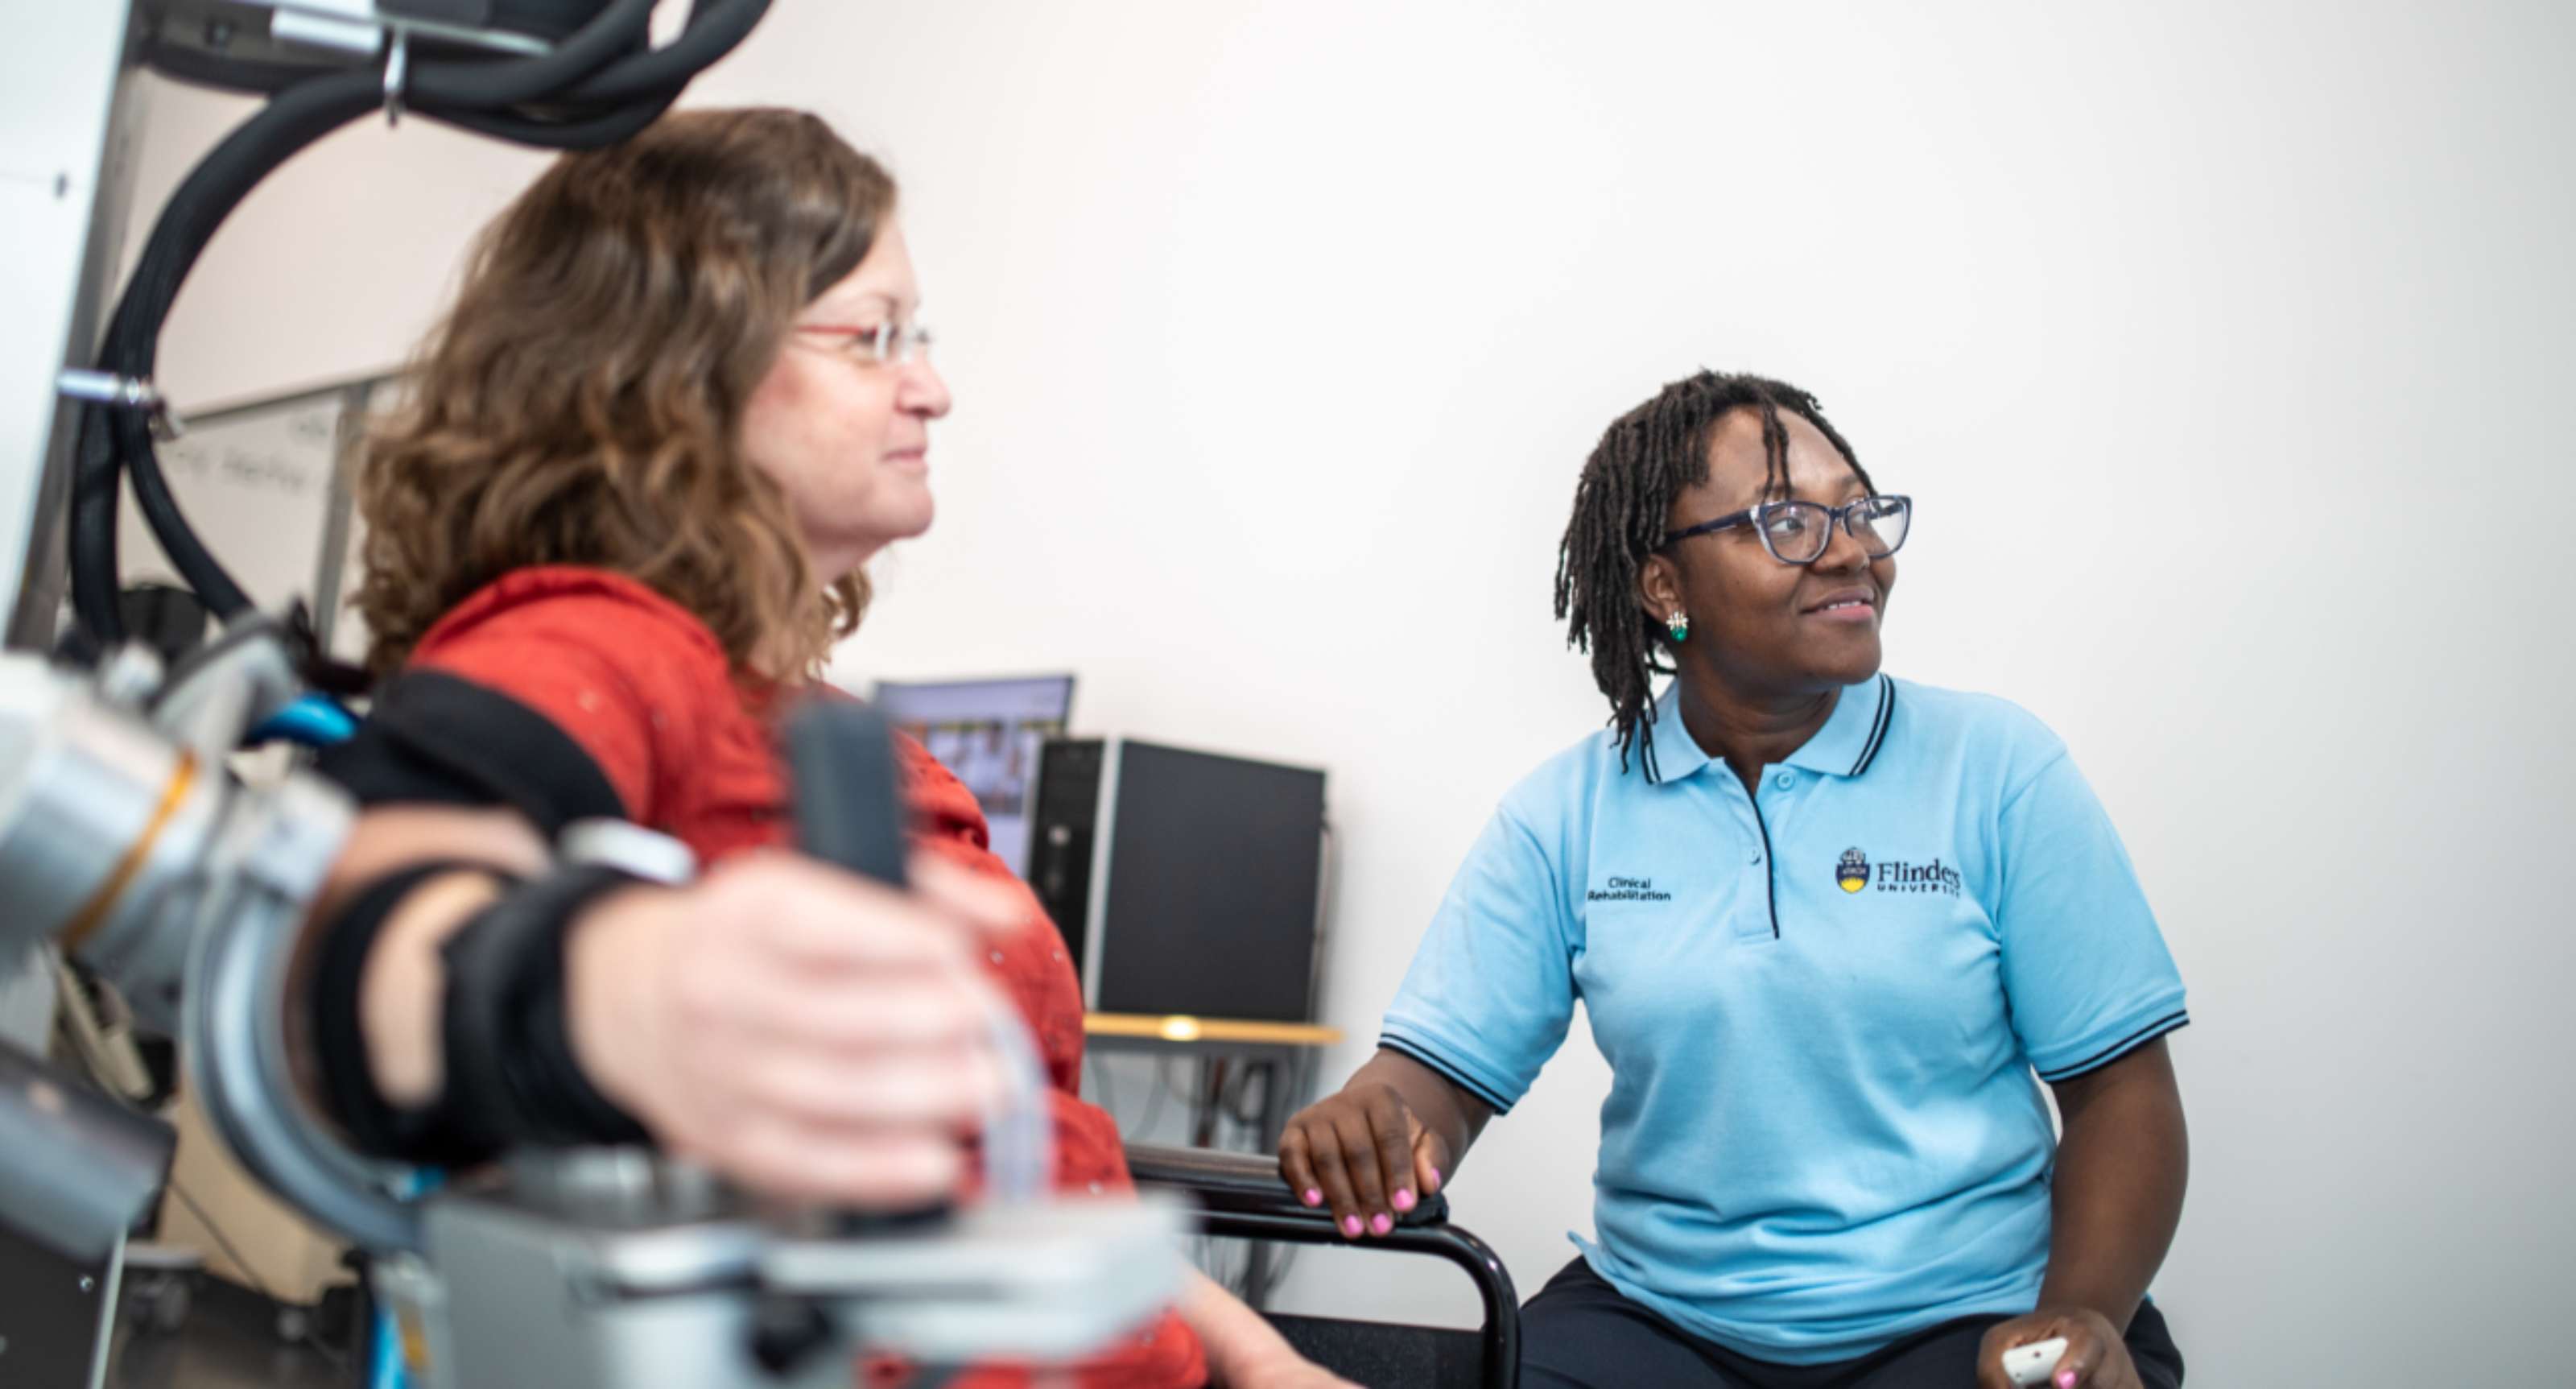 Bridget Numarce, a physiotherapist from Ghana, is upskilling her career in health with a Master of Clinical Rehabilitation.